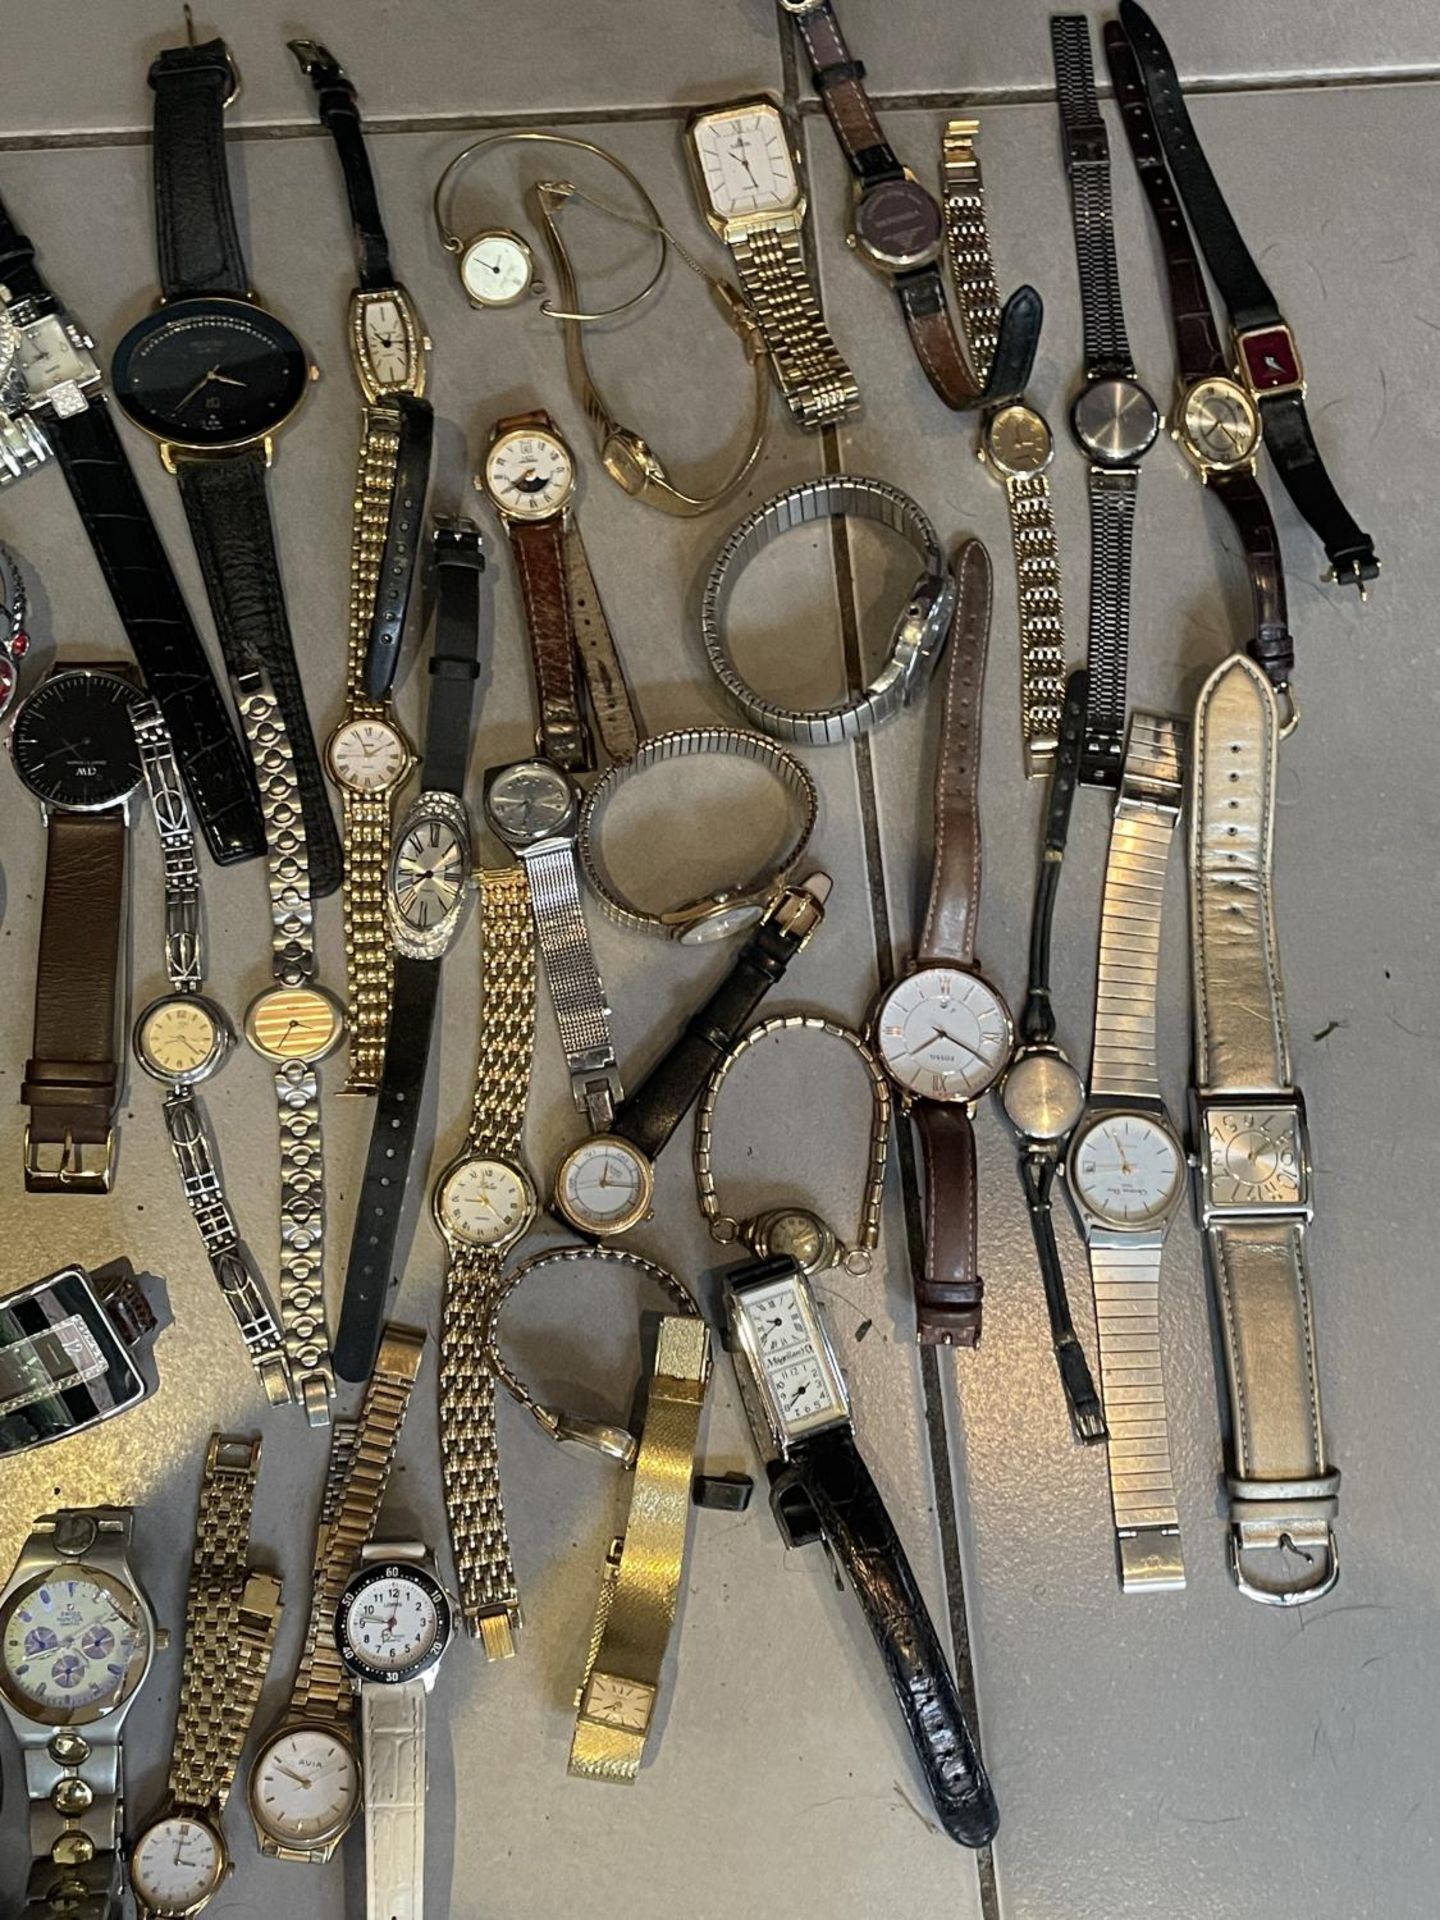 OVER FIFTY FIVE VARIOUS WRIST WATCHES TO INCLUDE ORIS, LEUBA, RAYMOND WEIL ETC - Image 4 of 4